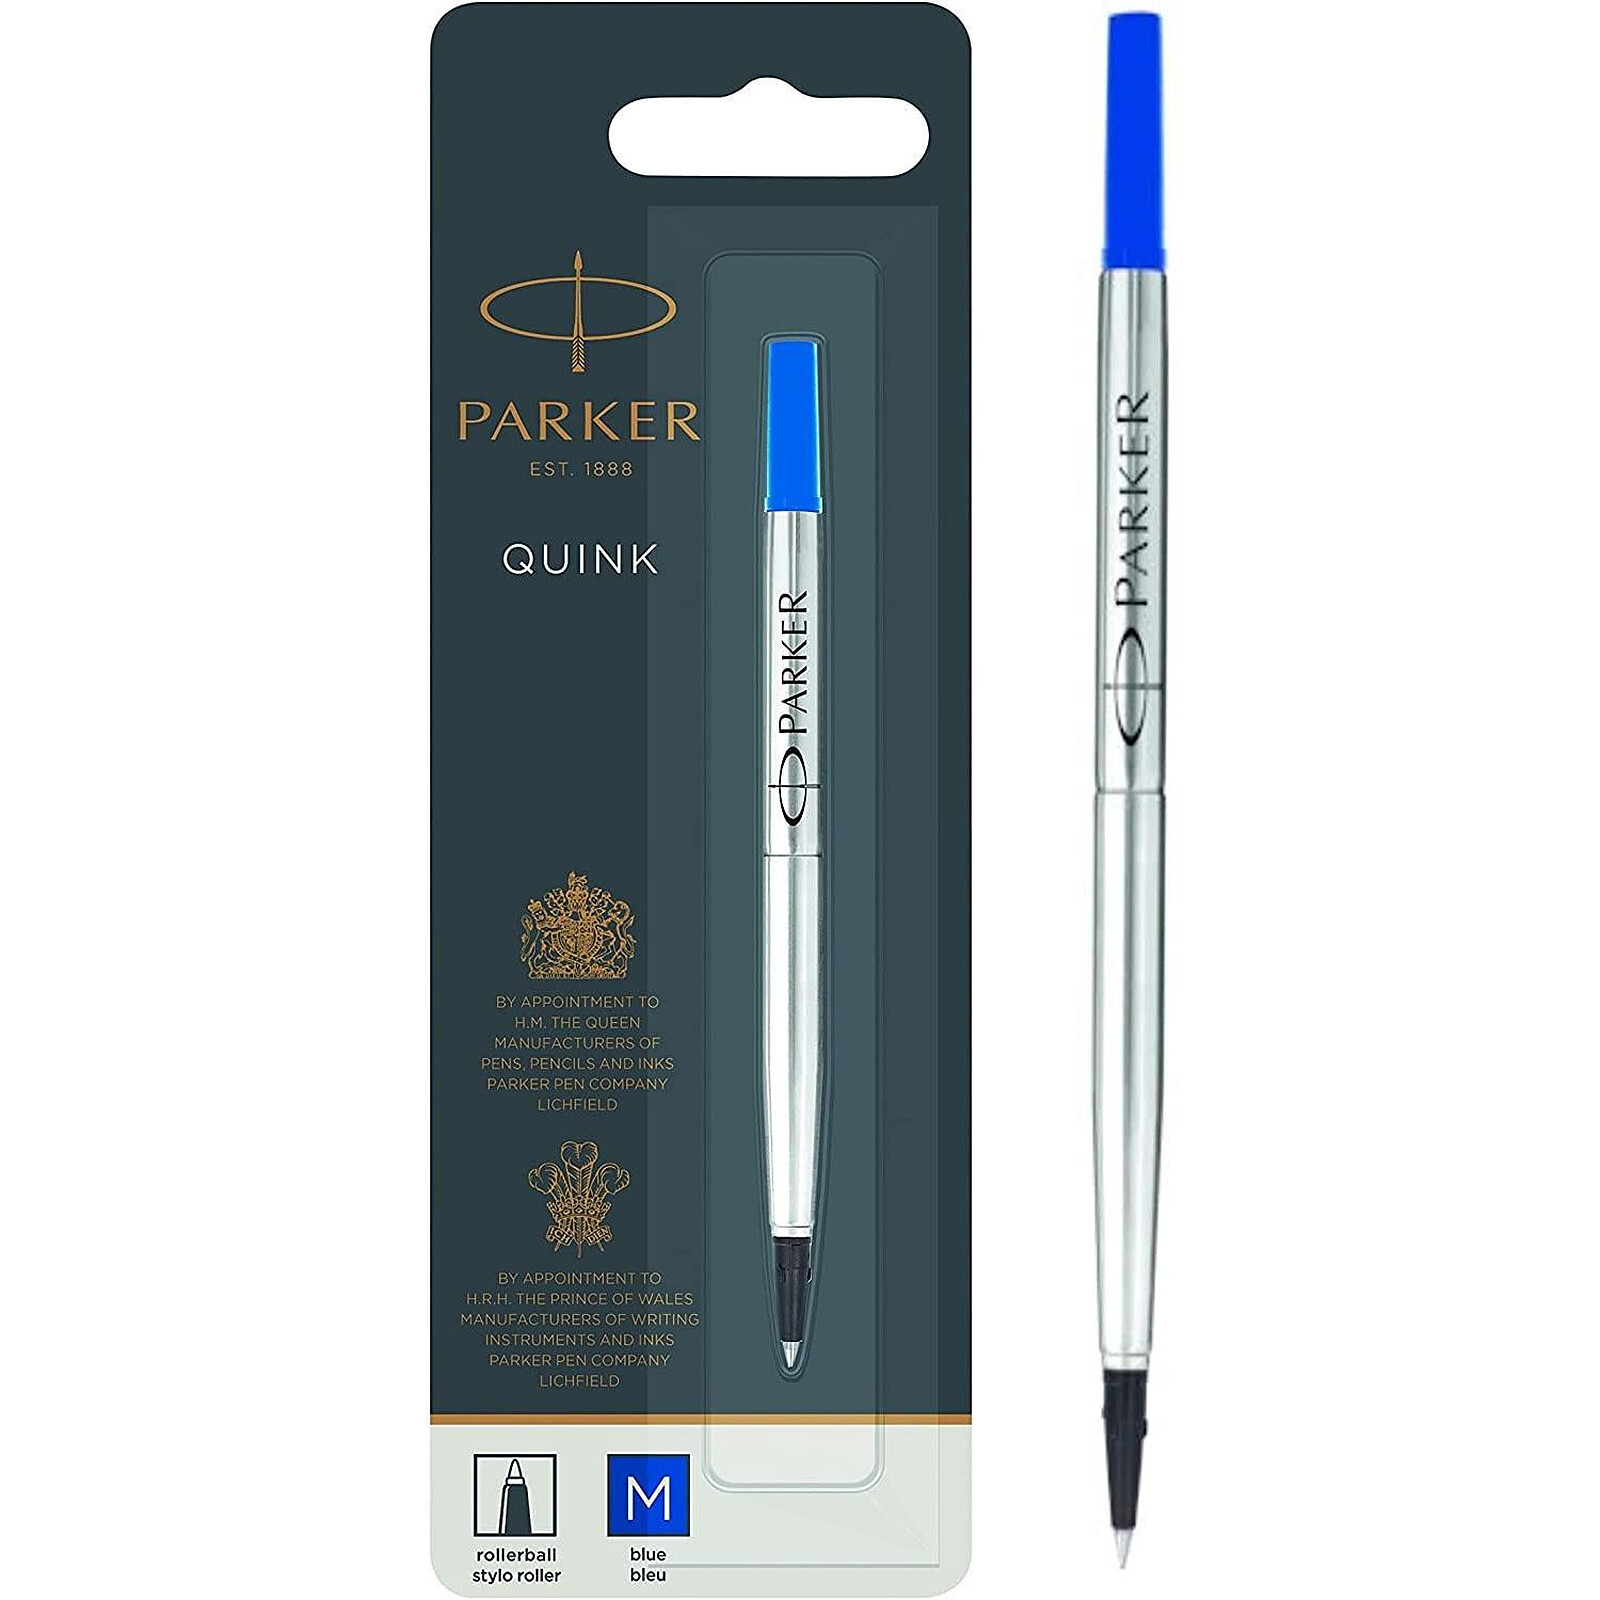 2 stylos rollers Frixion Ball Point coloris bleu - Stylos-rollers